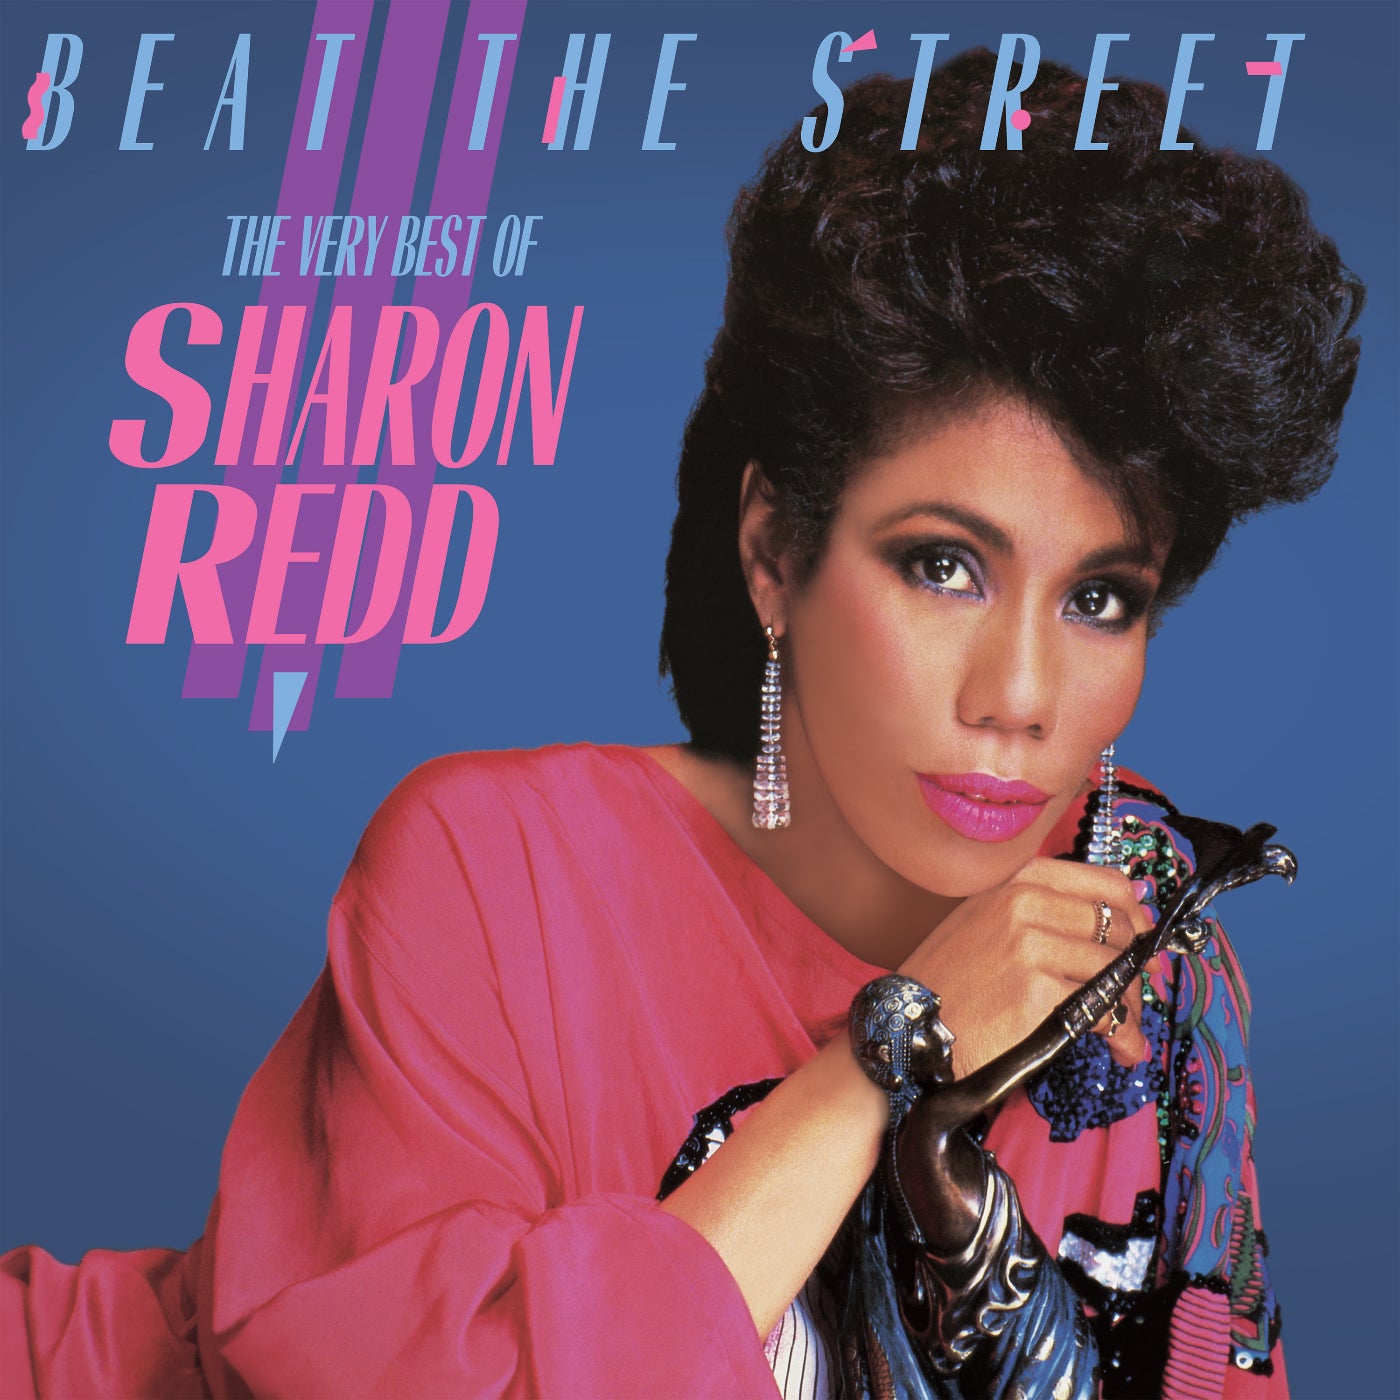 Beat The Street: The Very Best Of Sharon Red